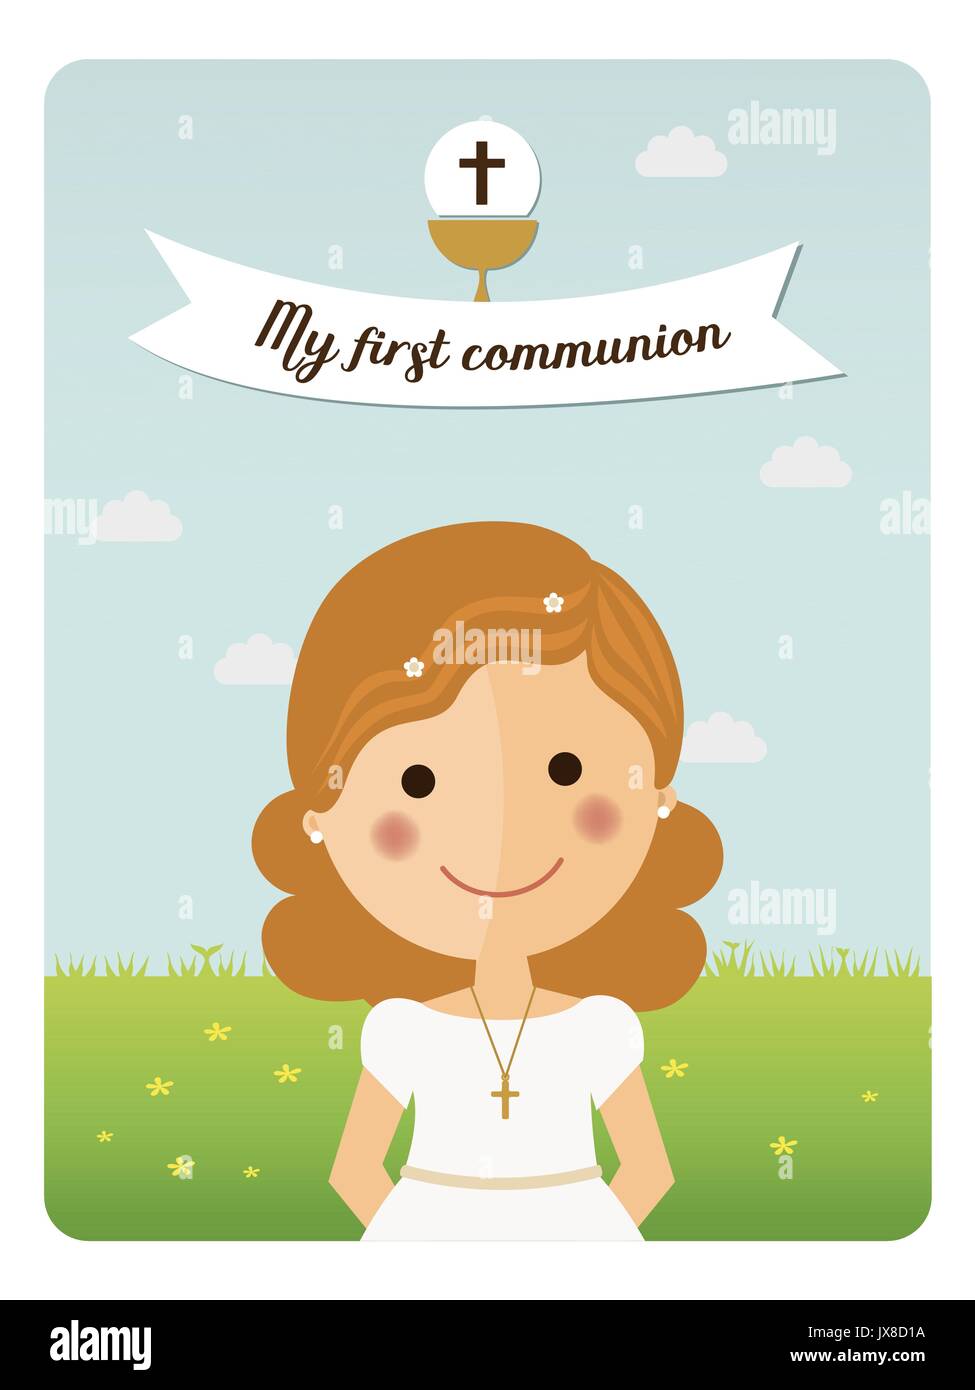 My first communion reminder with foreground girl and blue sky background Stock Vector